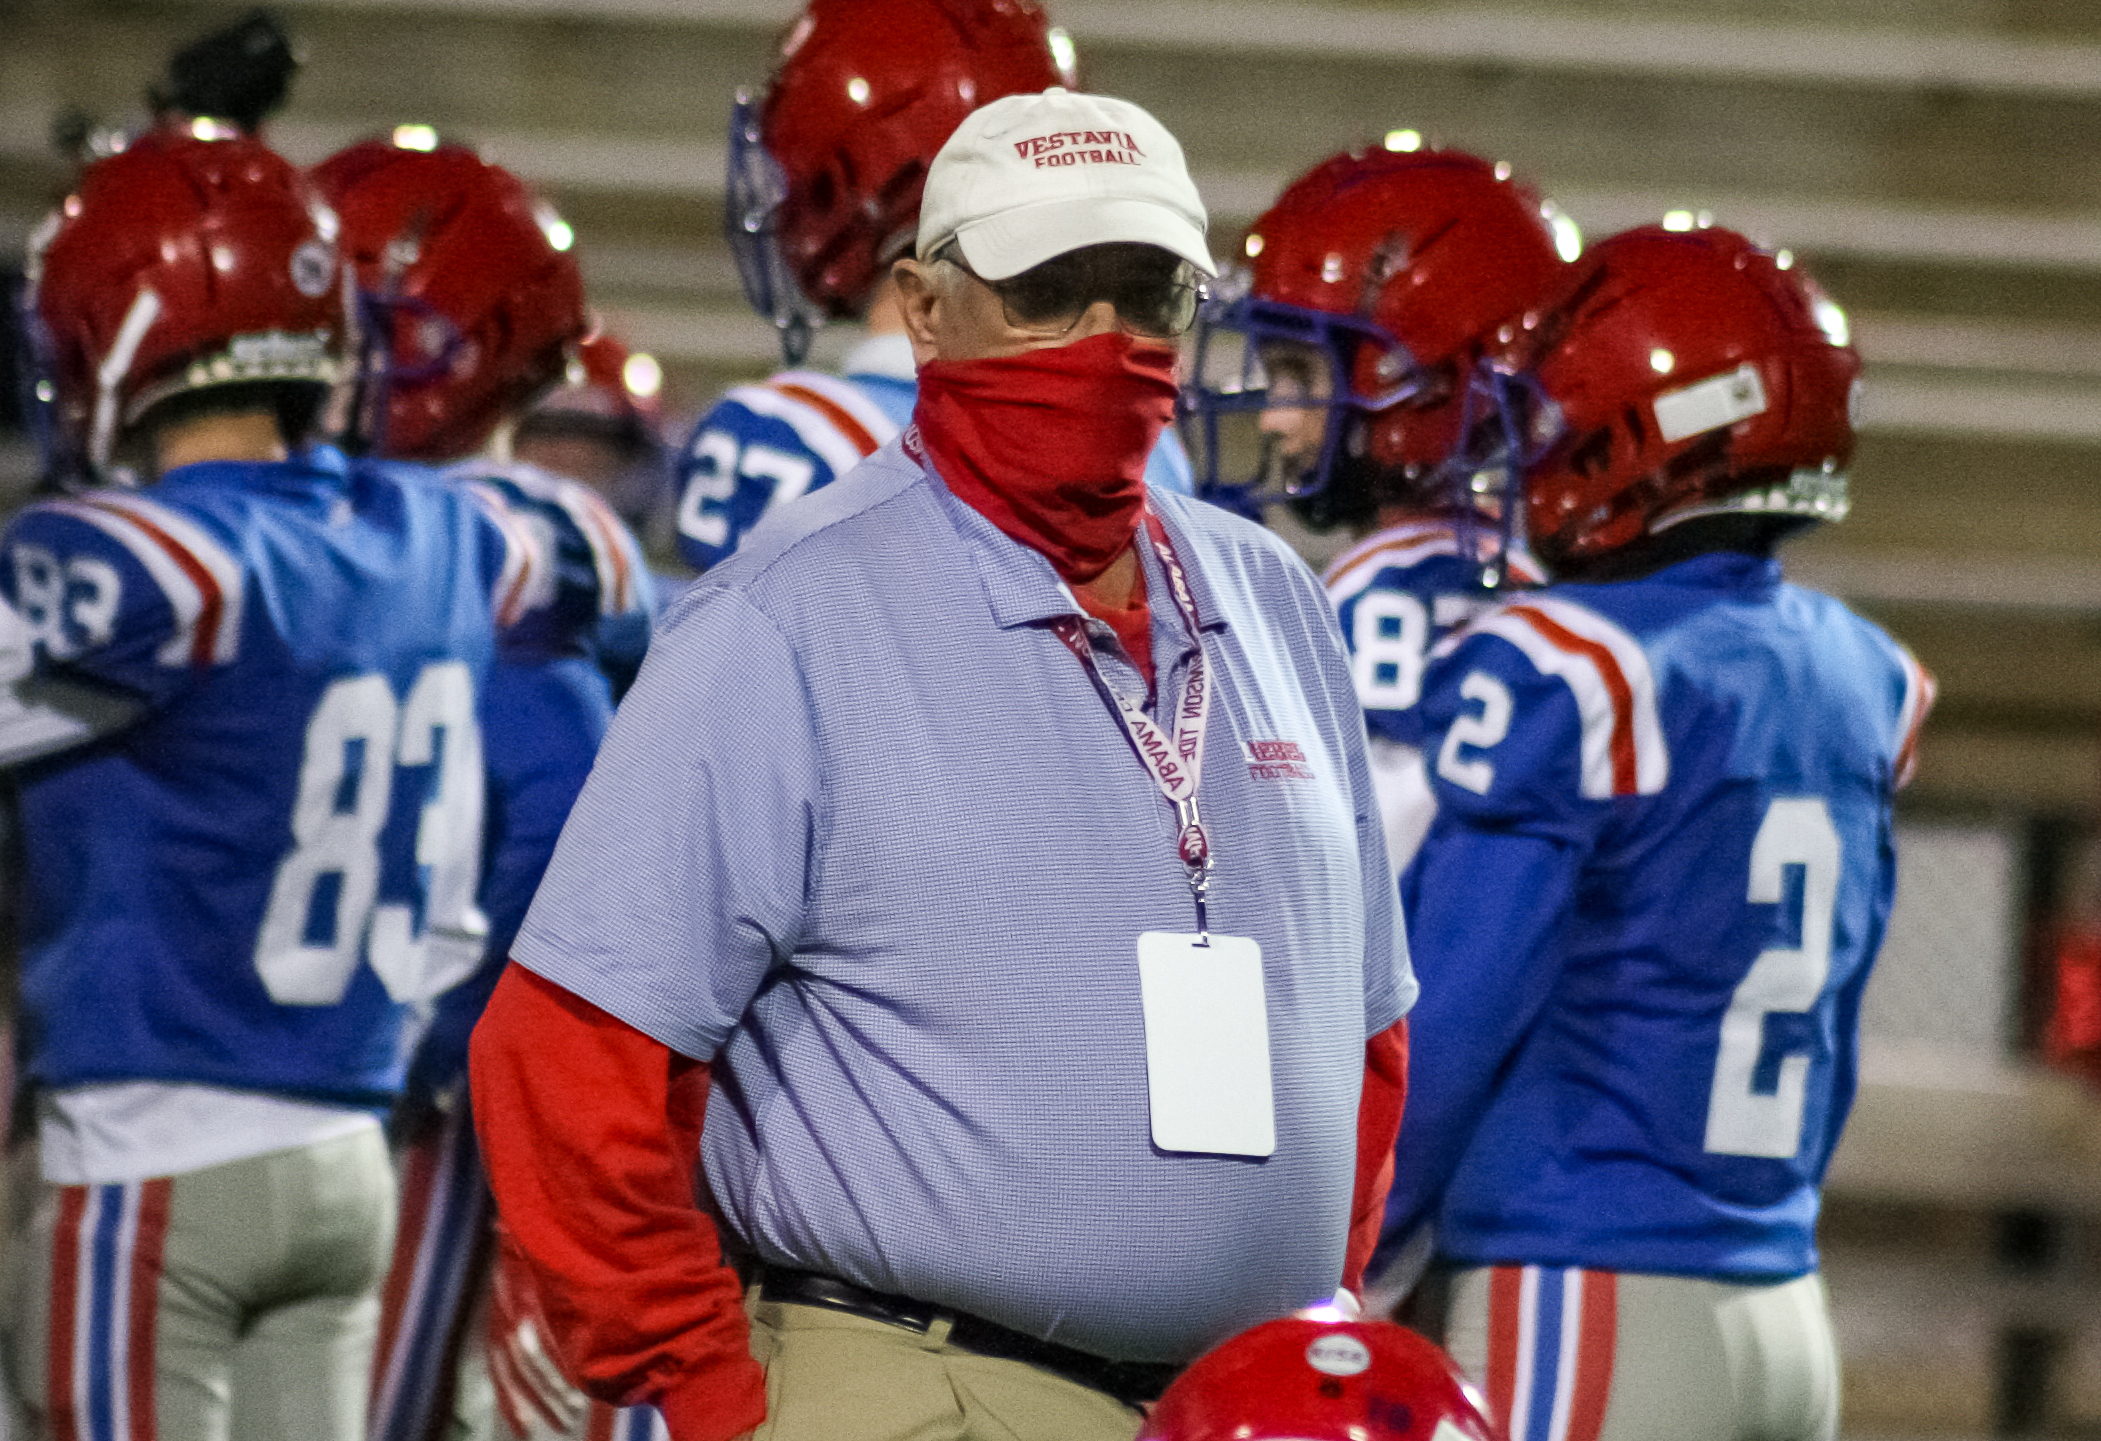 Vestavia caps Buddy Anderson’s career with a 52-27 win over Shades Valley